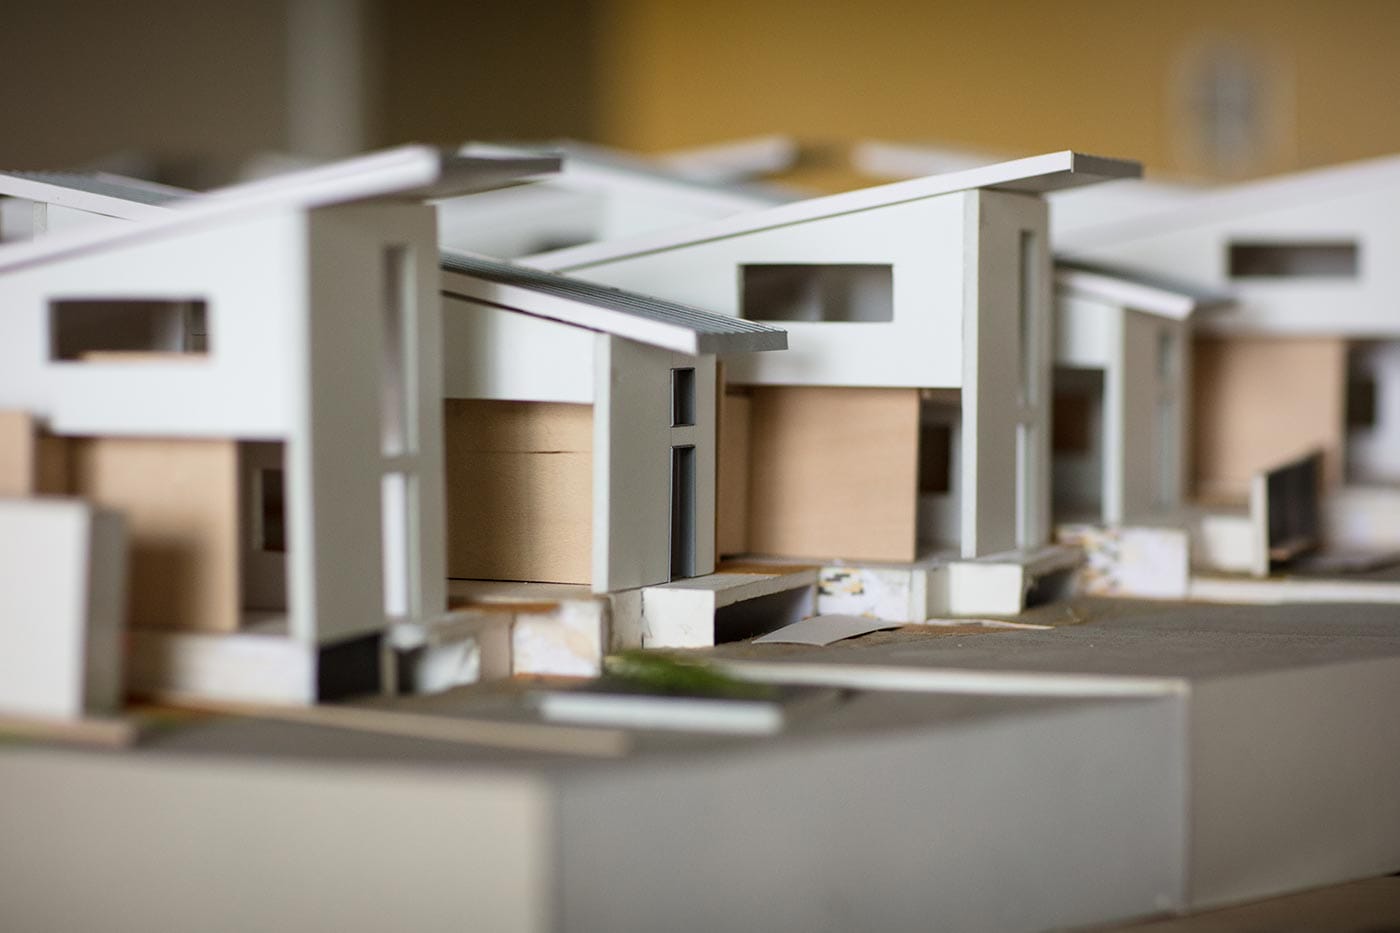 Architectural models of cross-border community stations, education-based public spaces, by Teddy Cruz.